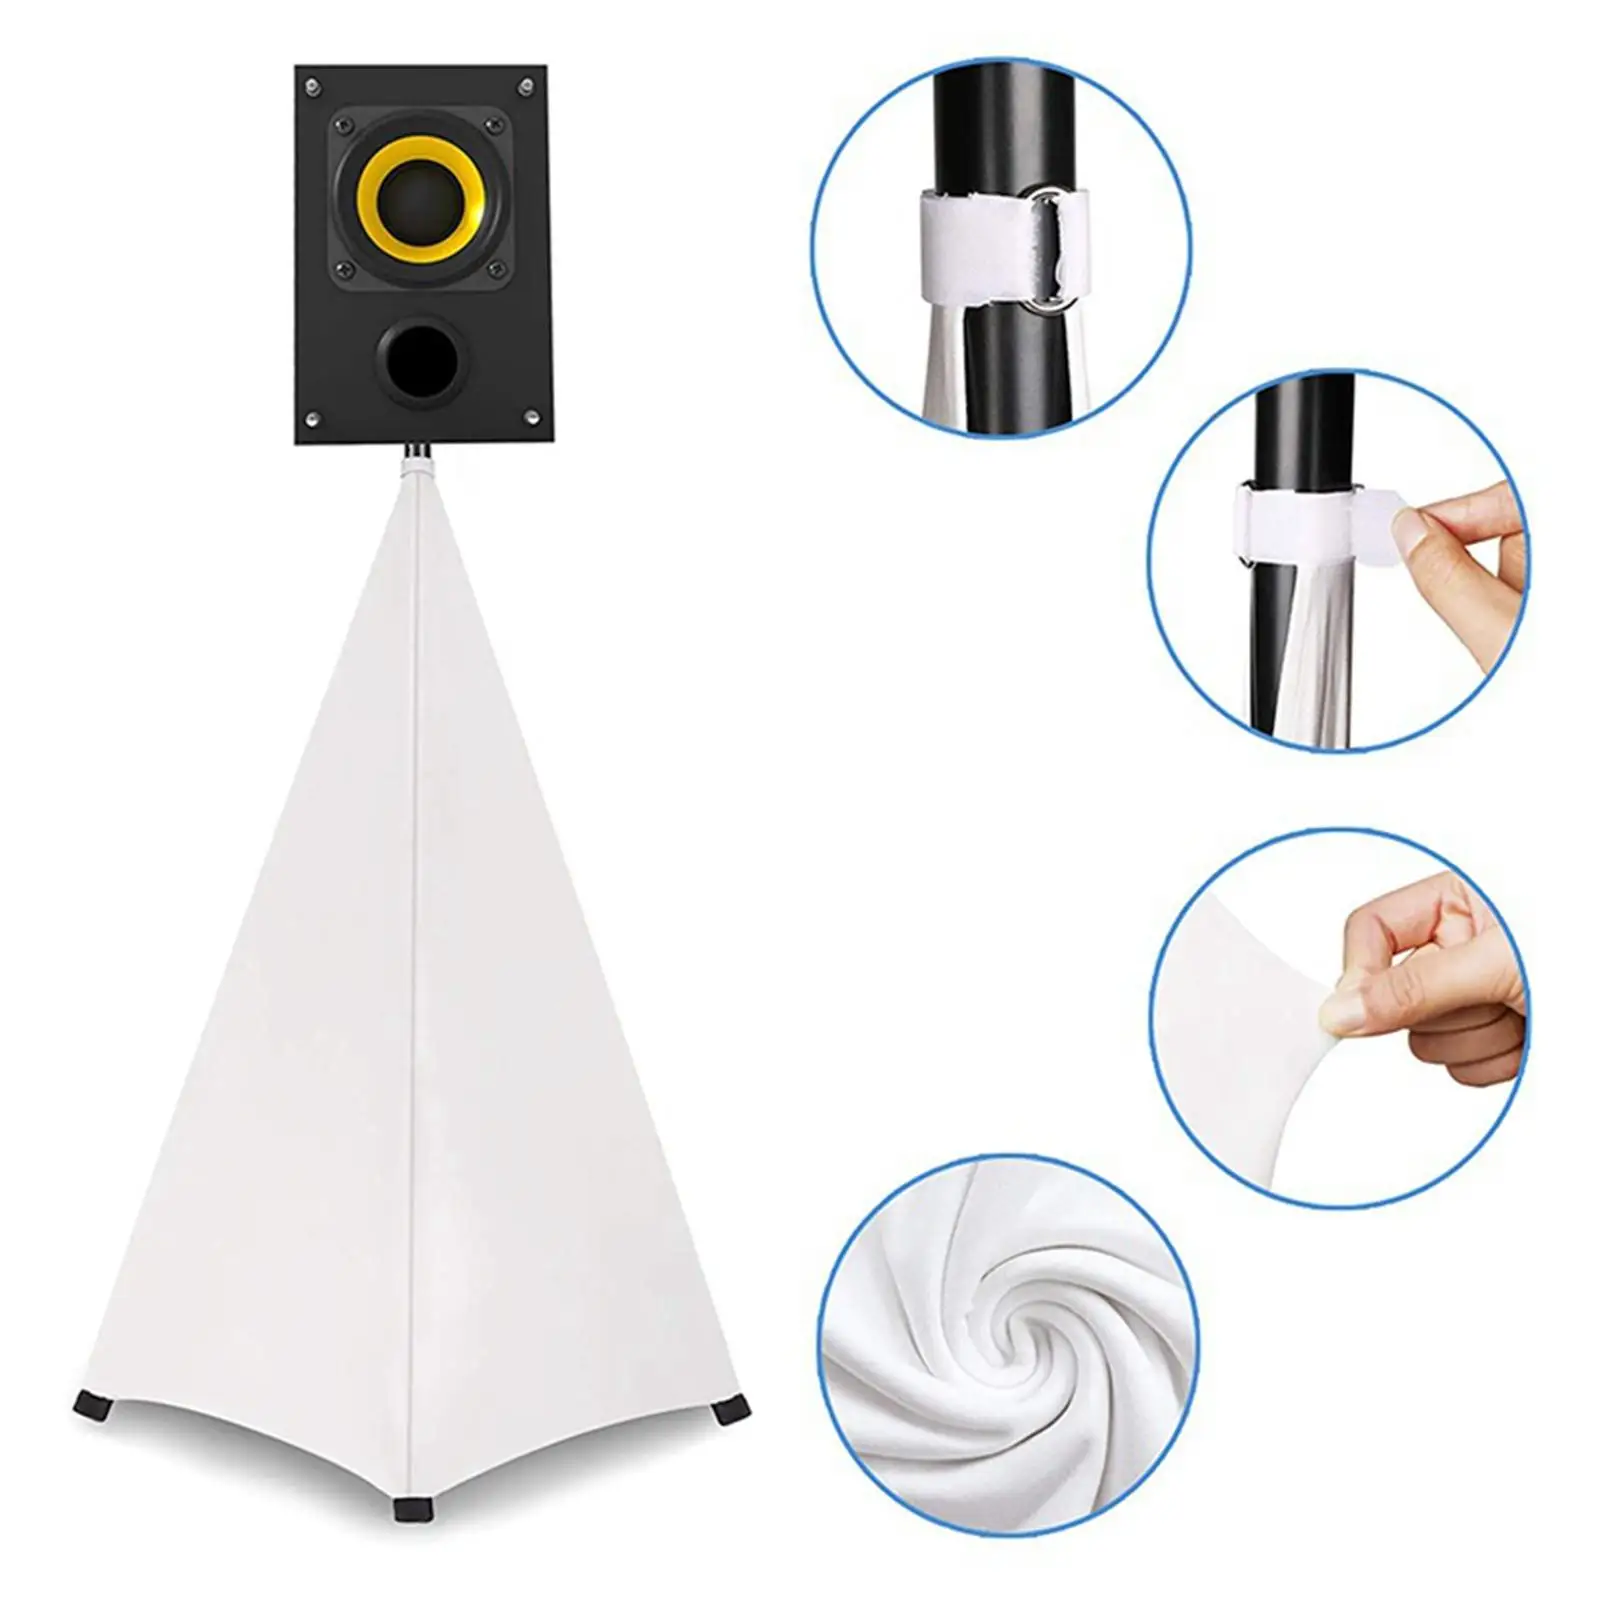 Universal Speaker Stand Cover Height Flexible Stretchable DJ Speaker Covers Tripod Stand Skirt Scrim for Weddings Events